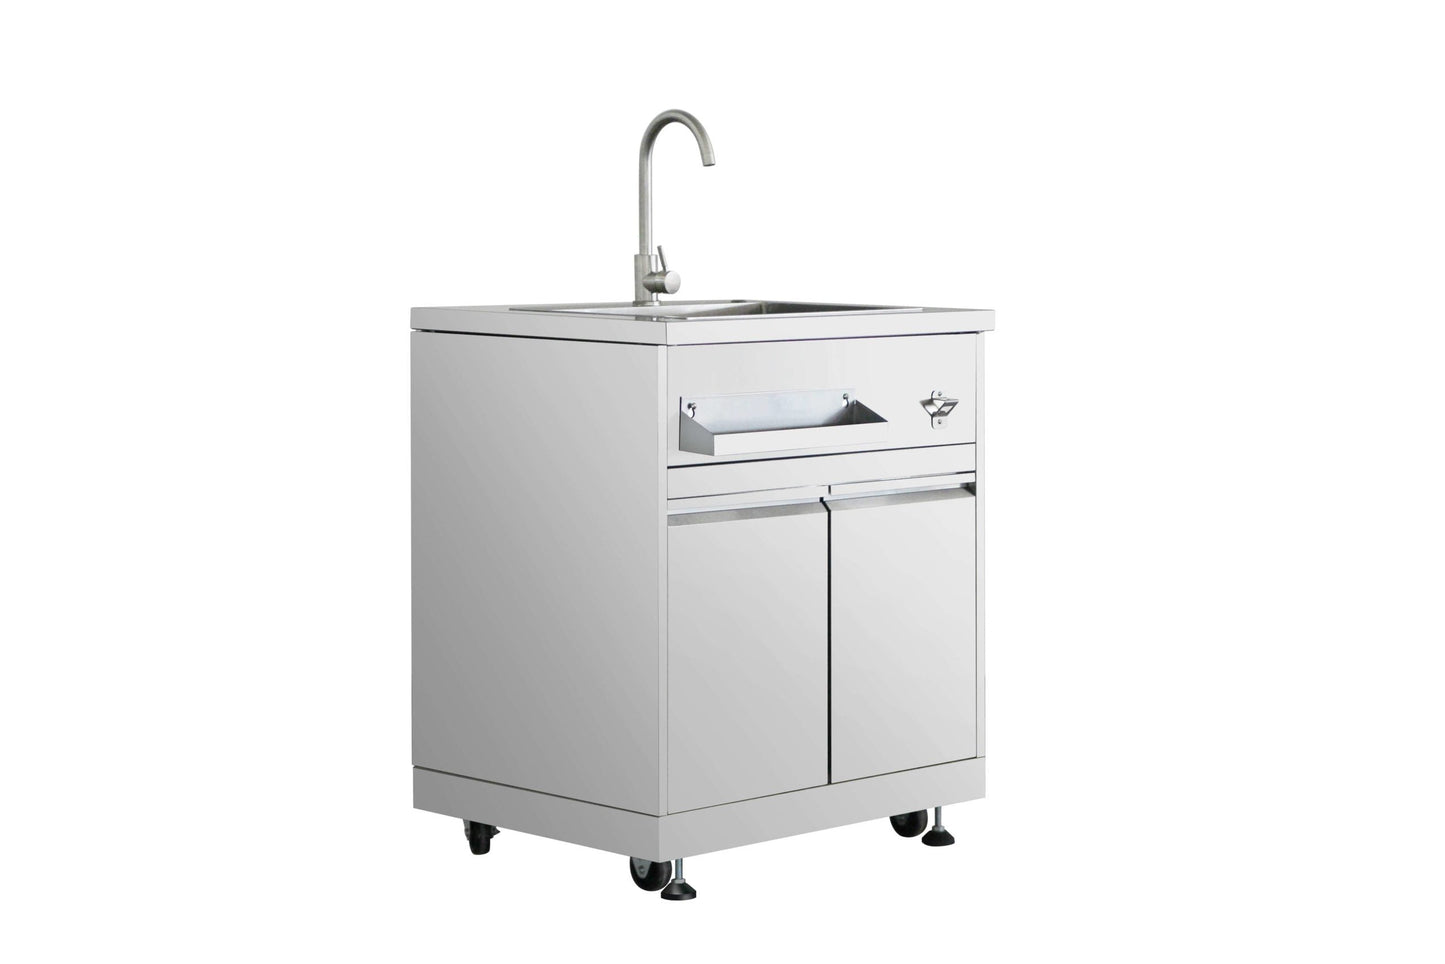 Thor Outdoor Kitchen Sink Cabinet in Stainless Steel